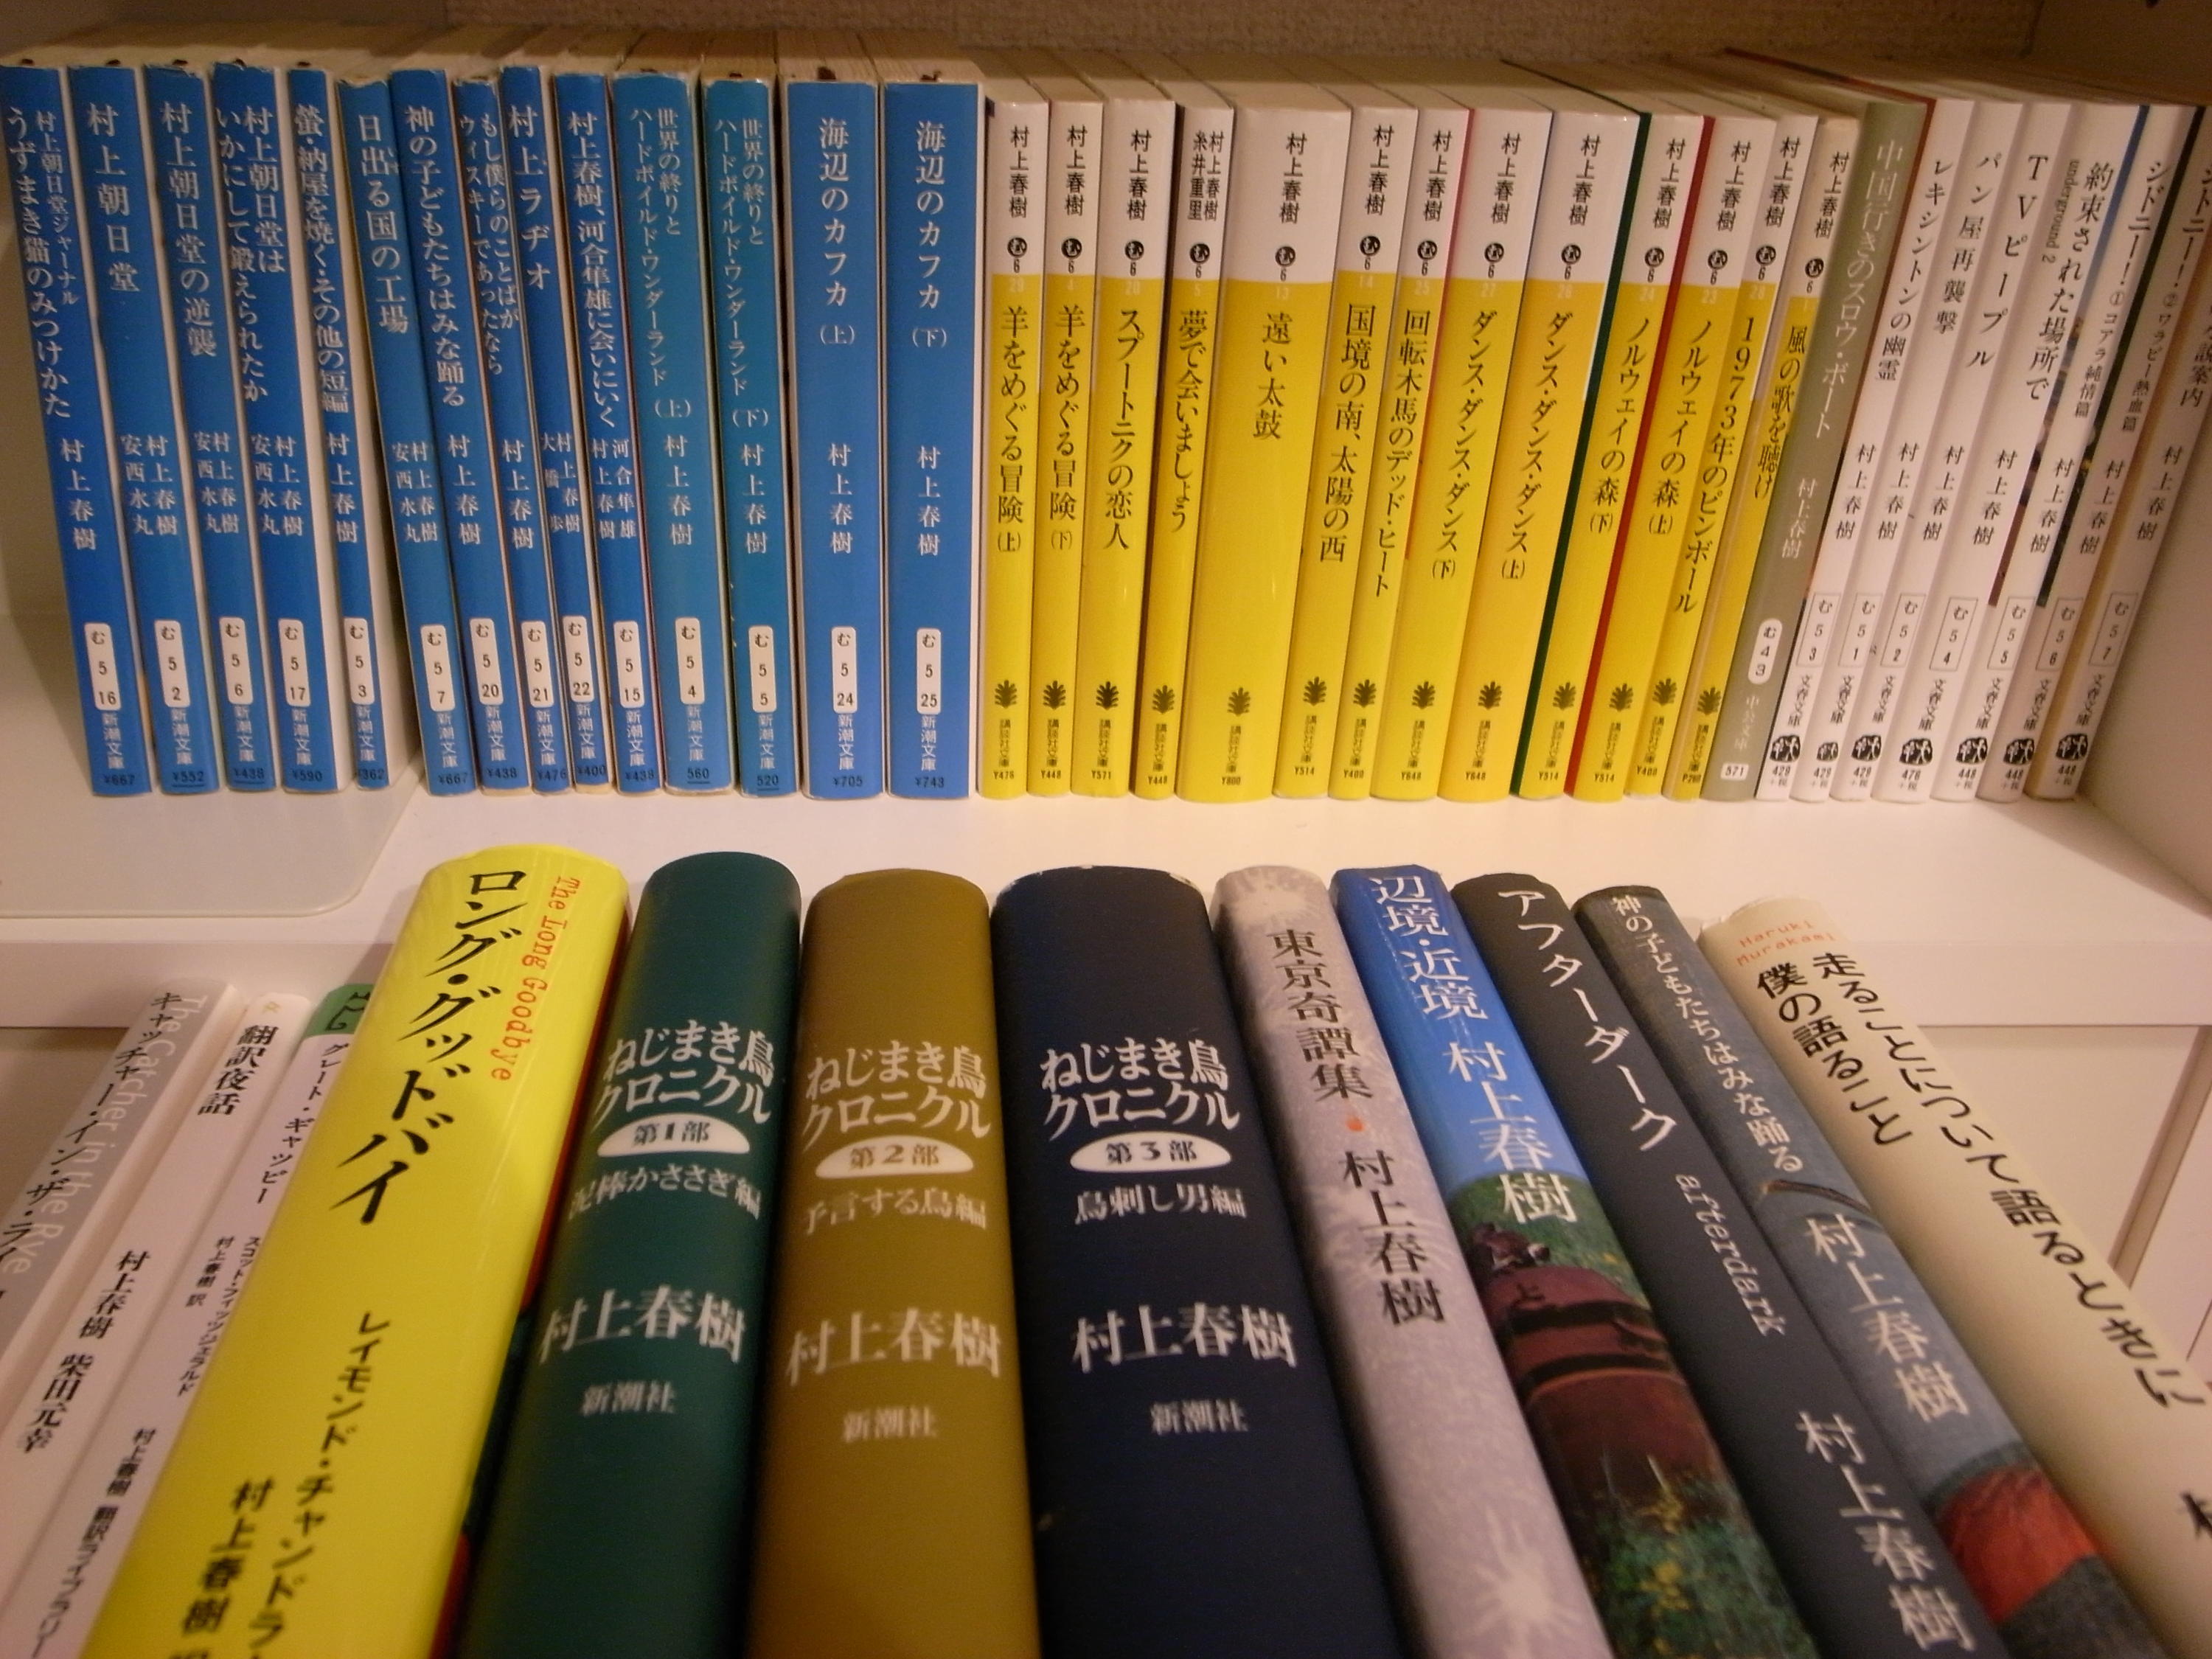 Several of Haruki Murakami's novels, laid with their titles prominent.